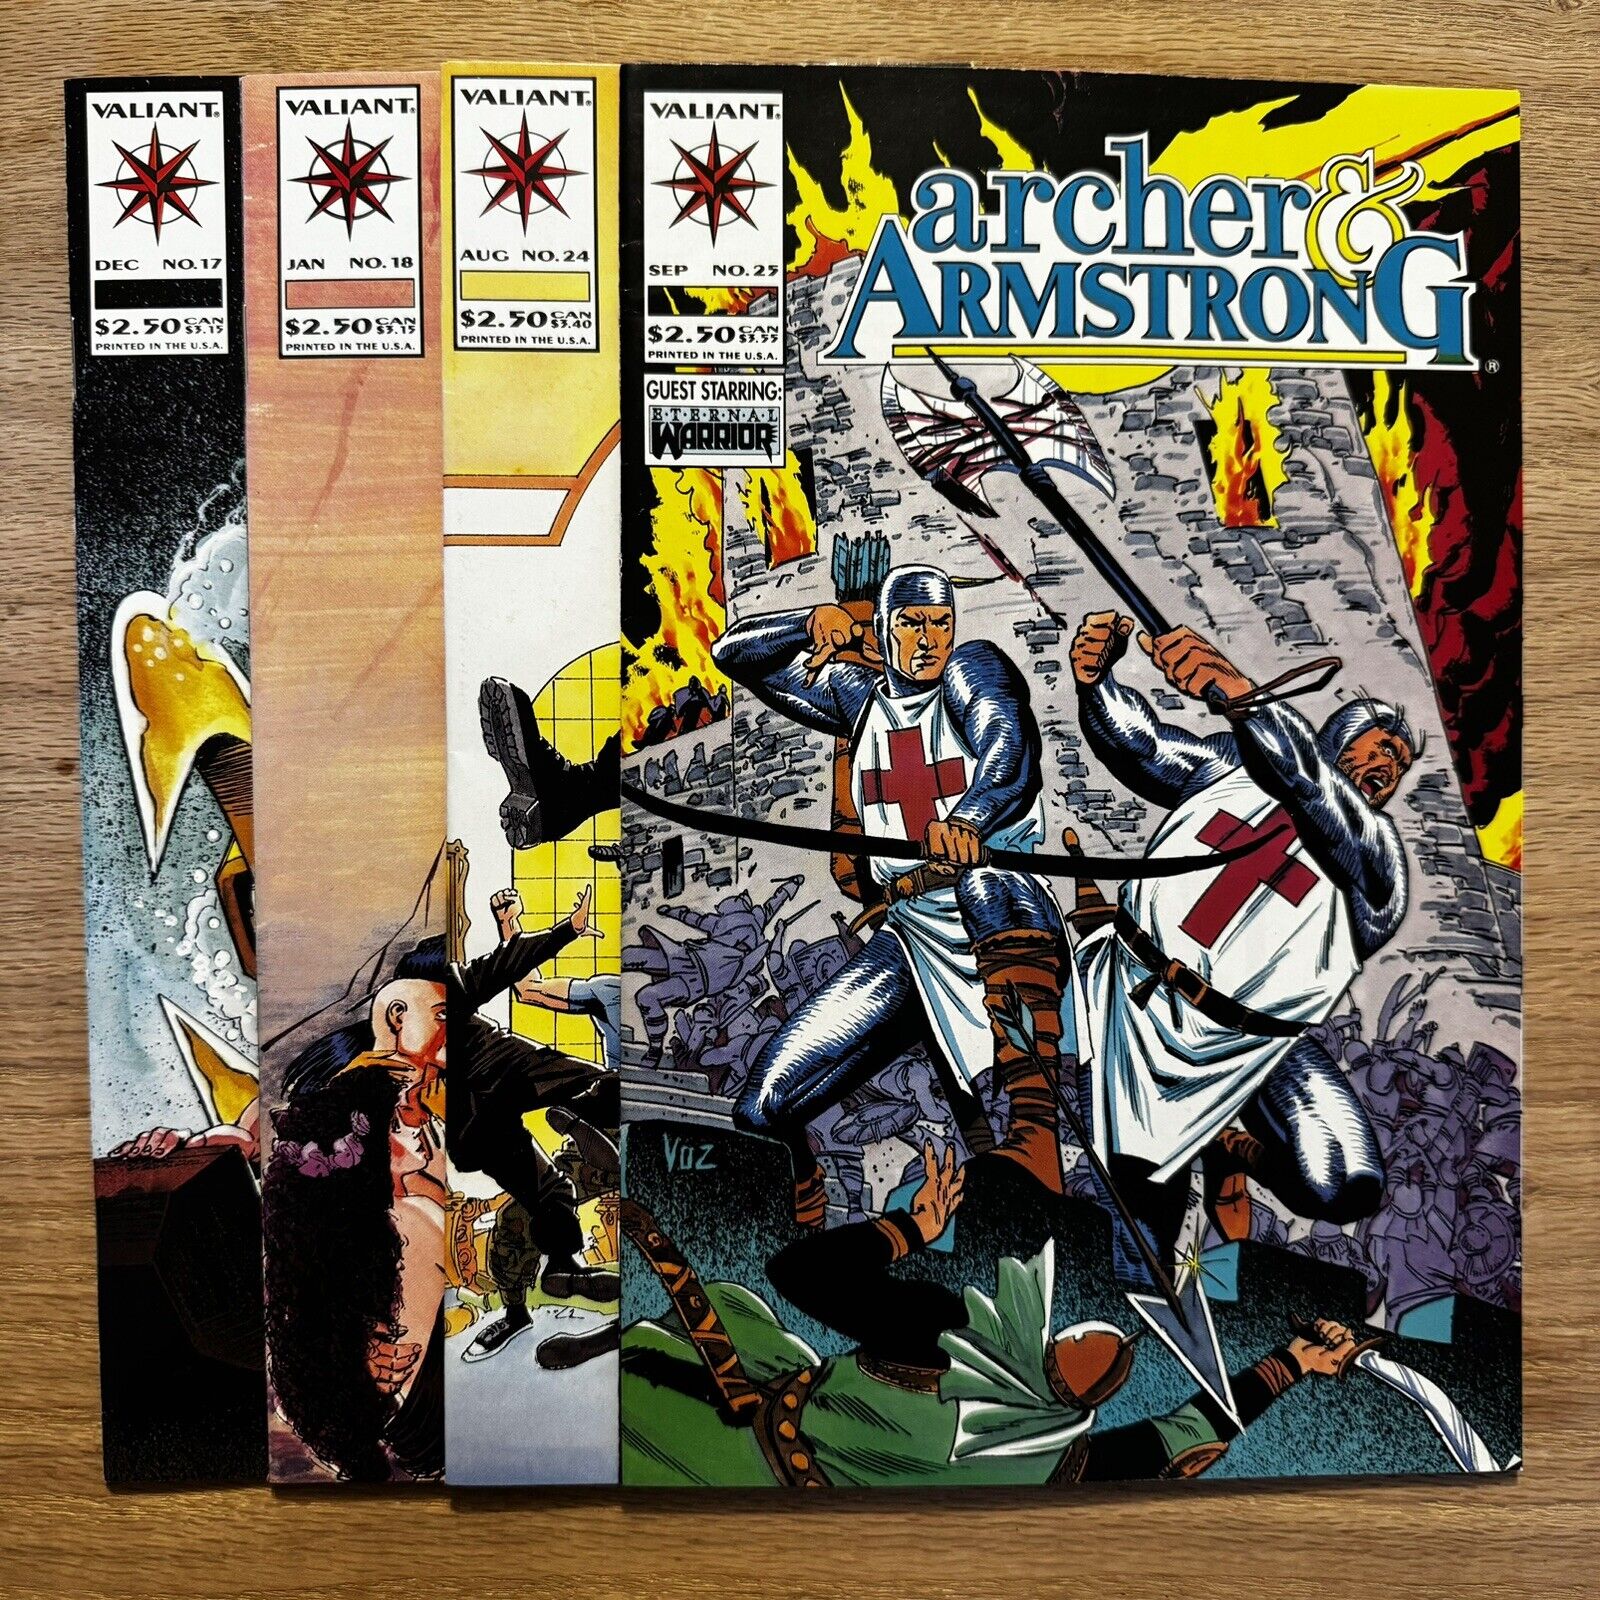 1993-1994 Archer And Armstrong Valiant Comics #17, #18, #24, #25 Lot of 4